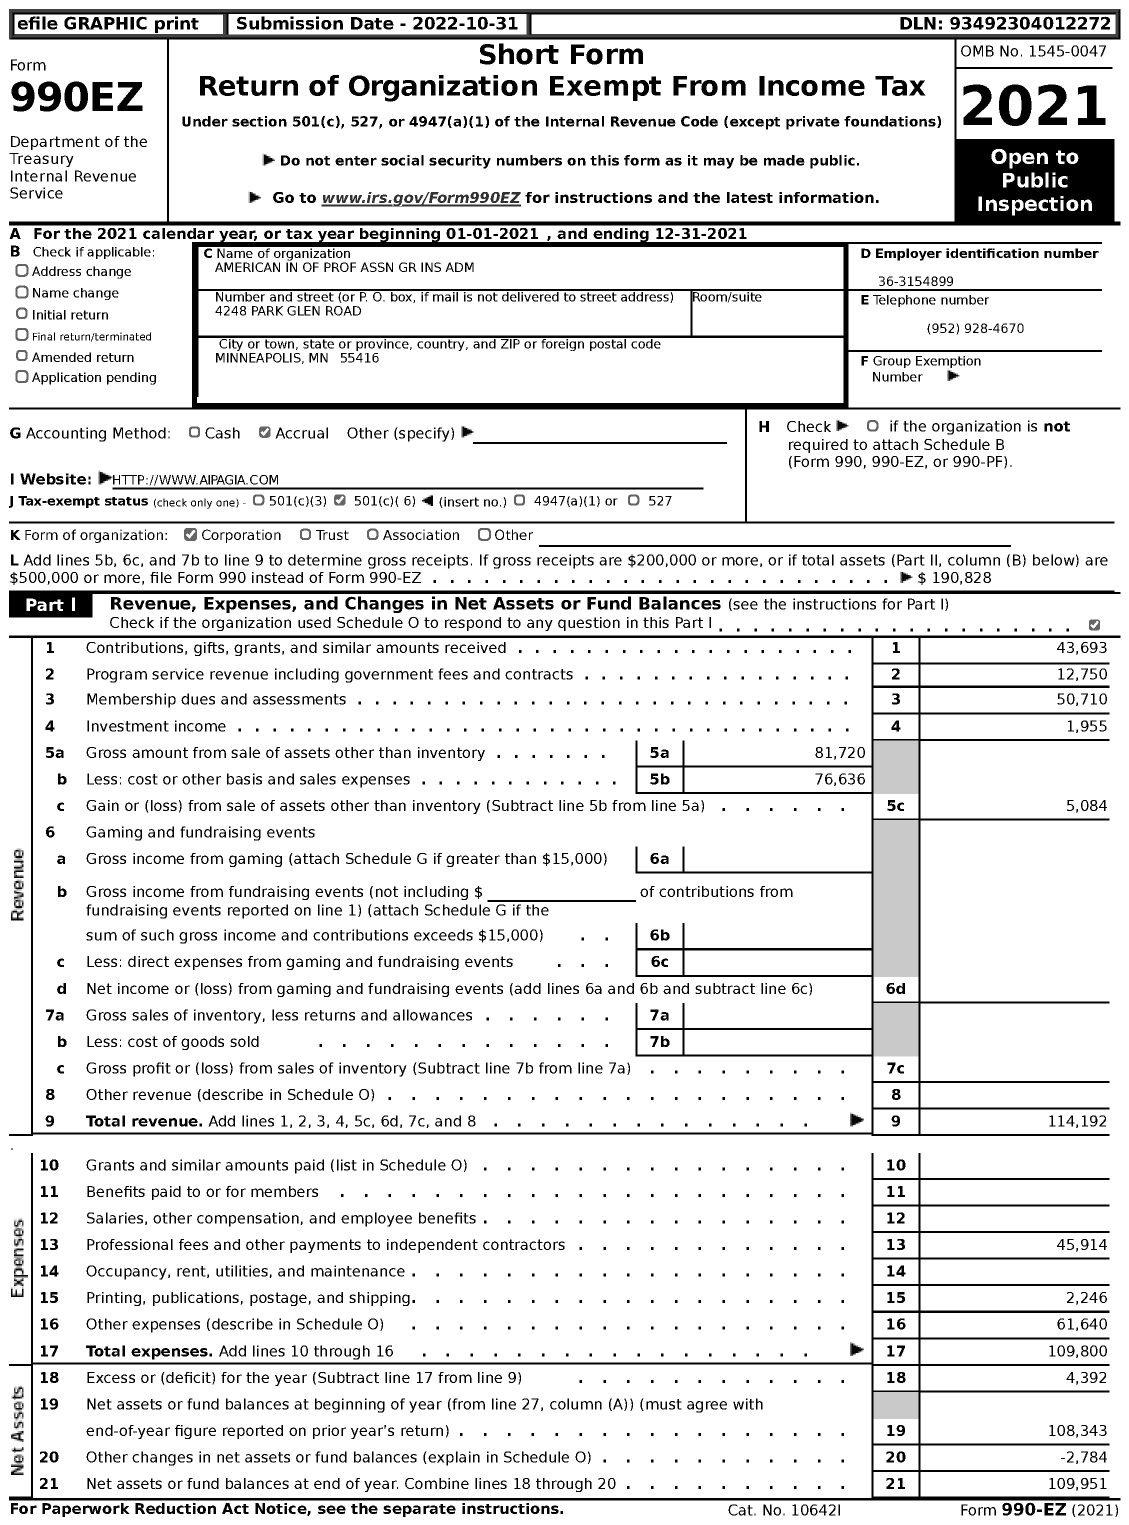 Image of first page of 2021 Form 990EZ for American in of Prof Association GR Ins Adm